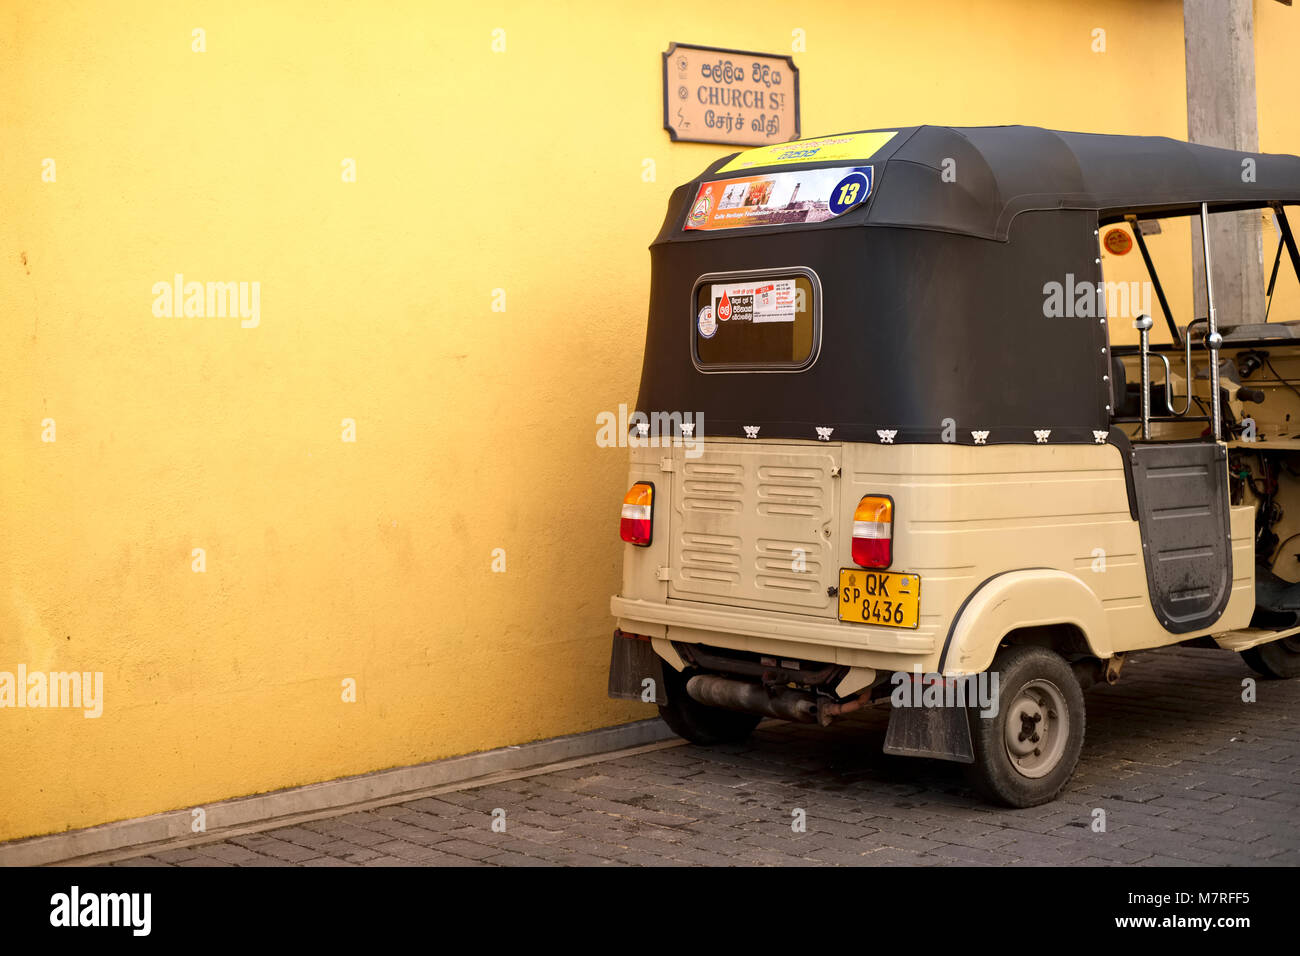 A beige coloured tuk tuk taxi against a yellow wall in Galle Fort in Sri Lanka Stock Photo